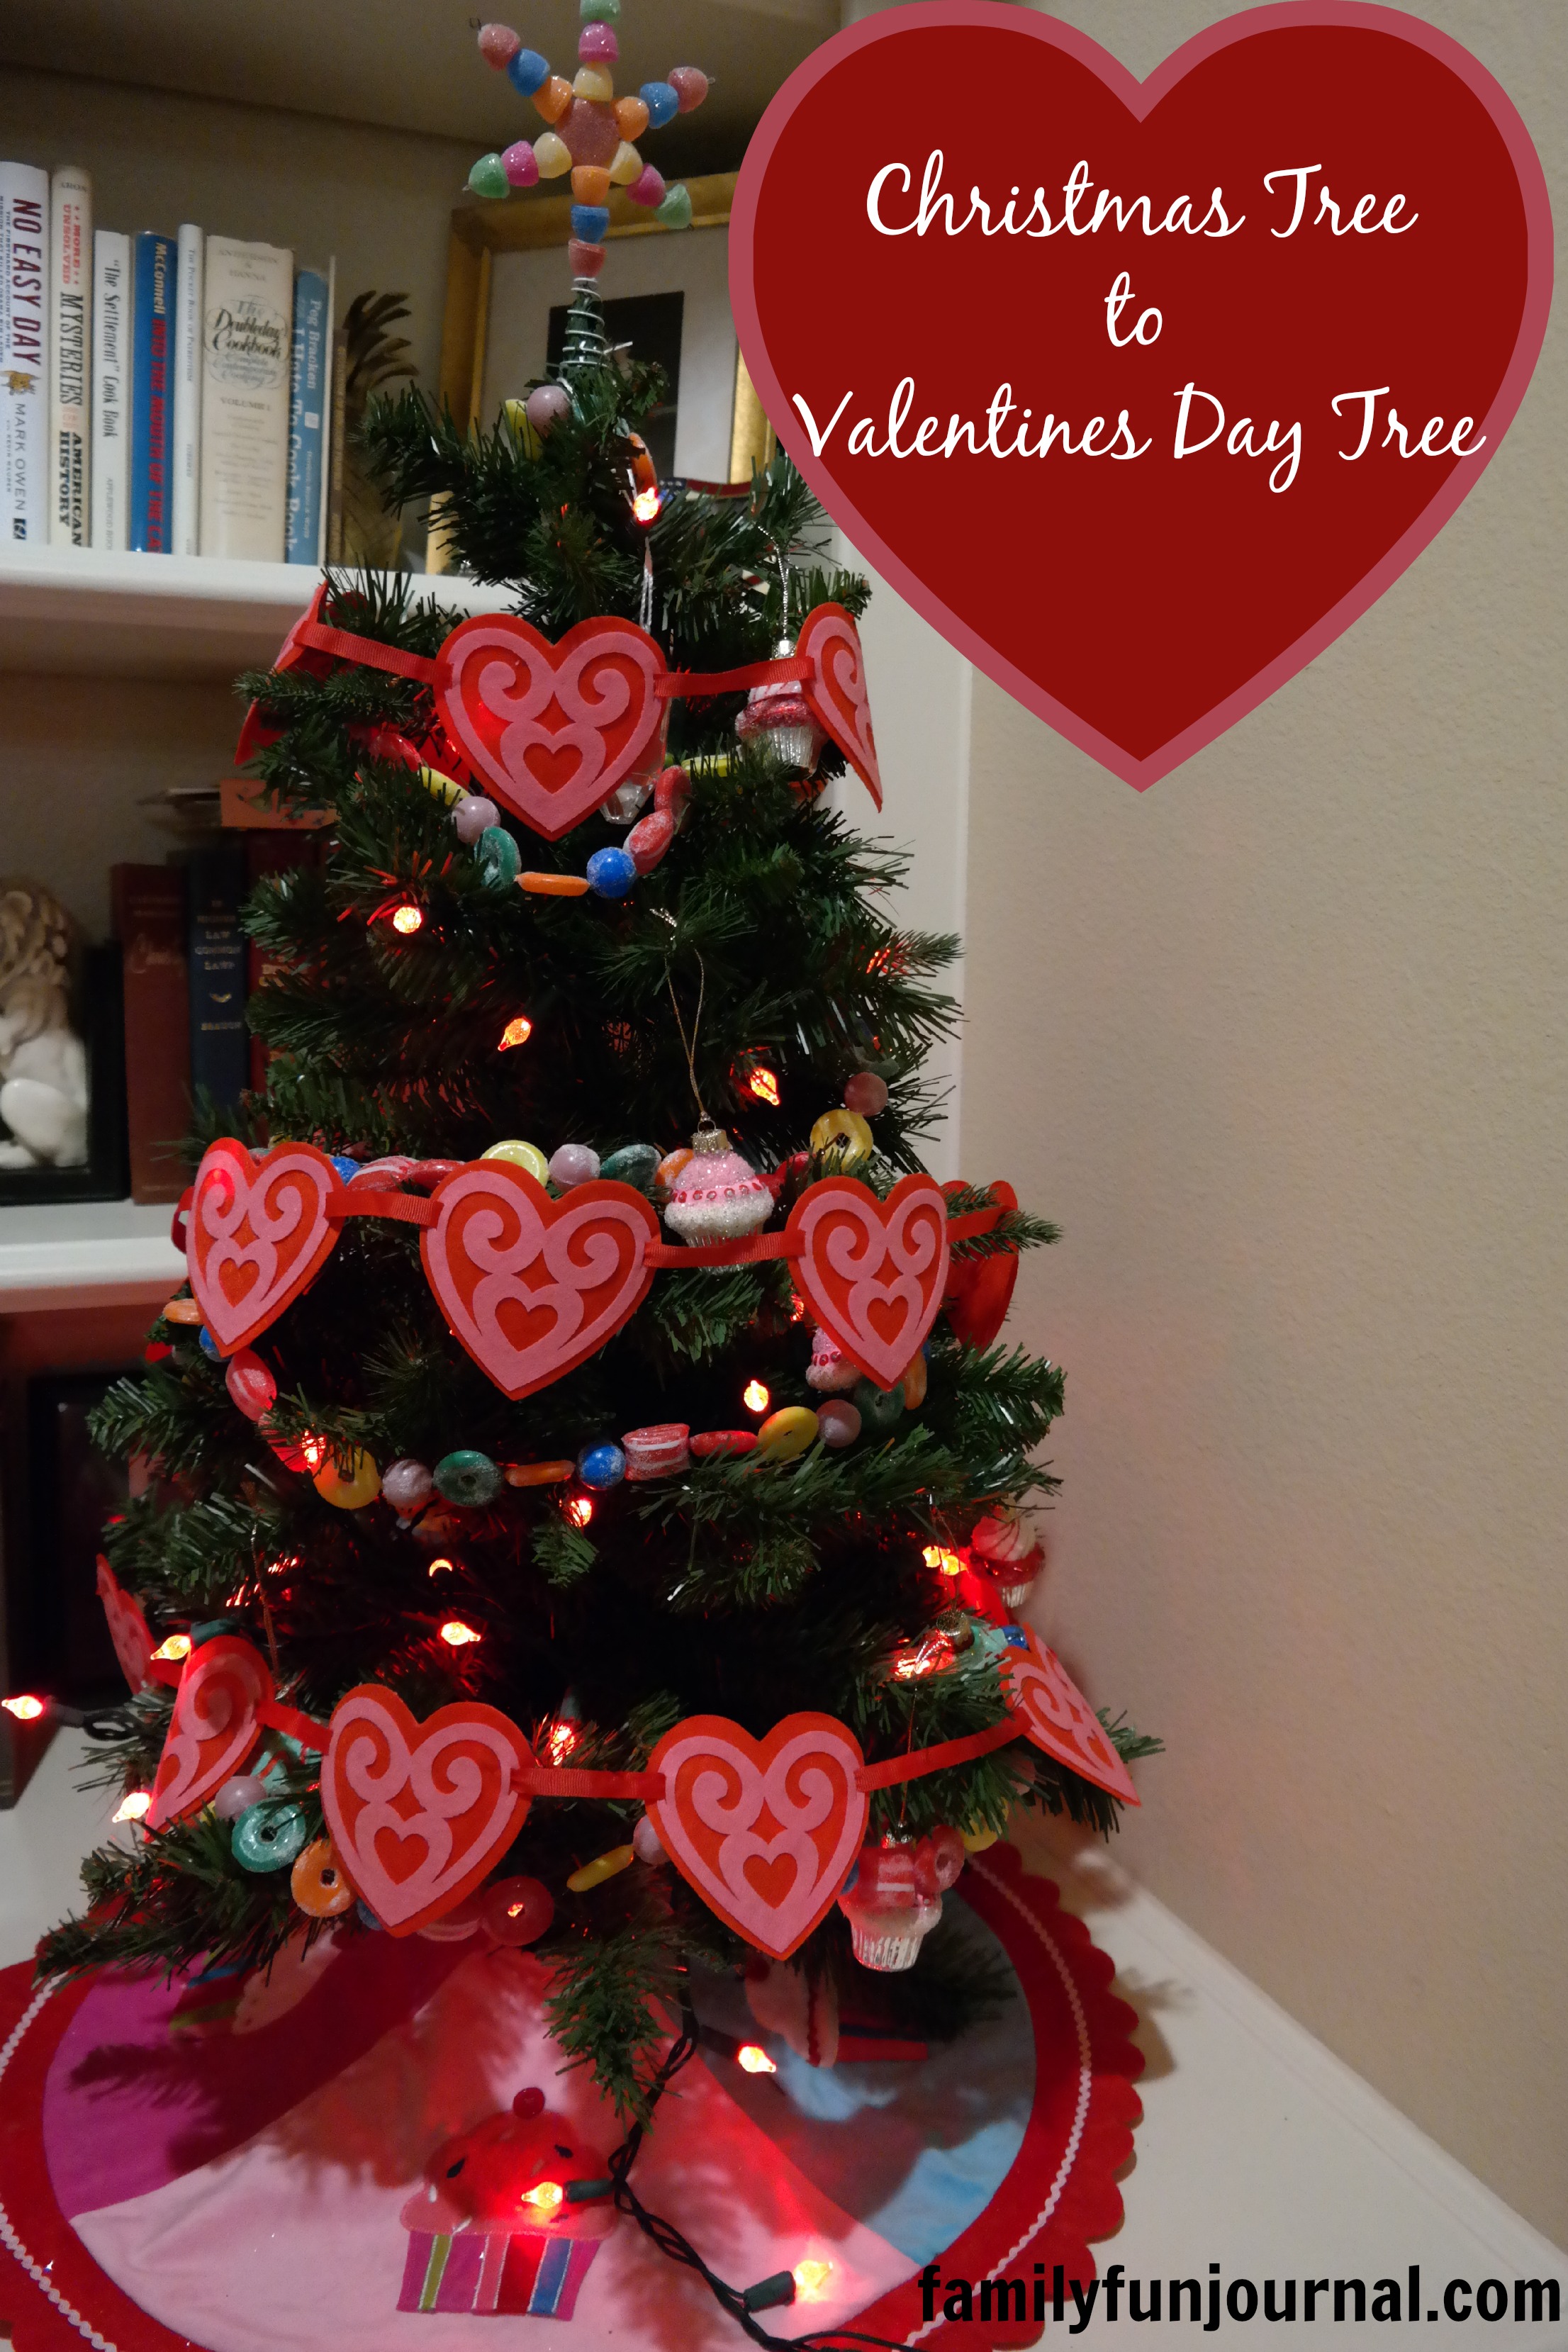 From Christmas Tree To Valentines Day Tree - Family Fun Journal